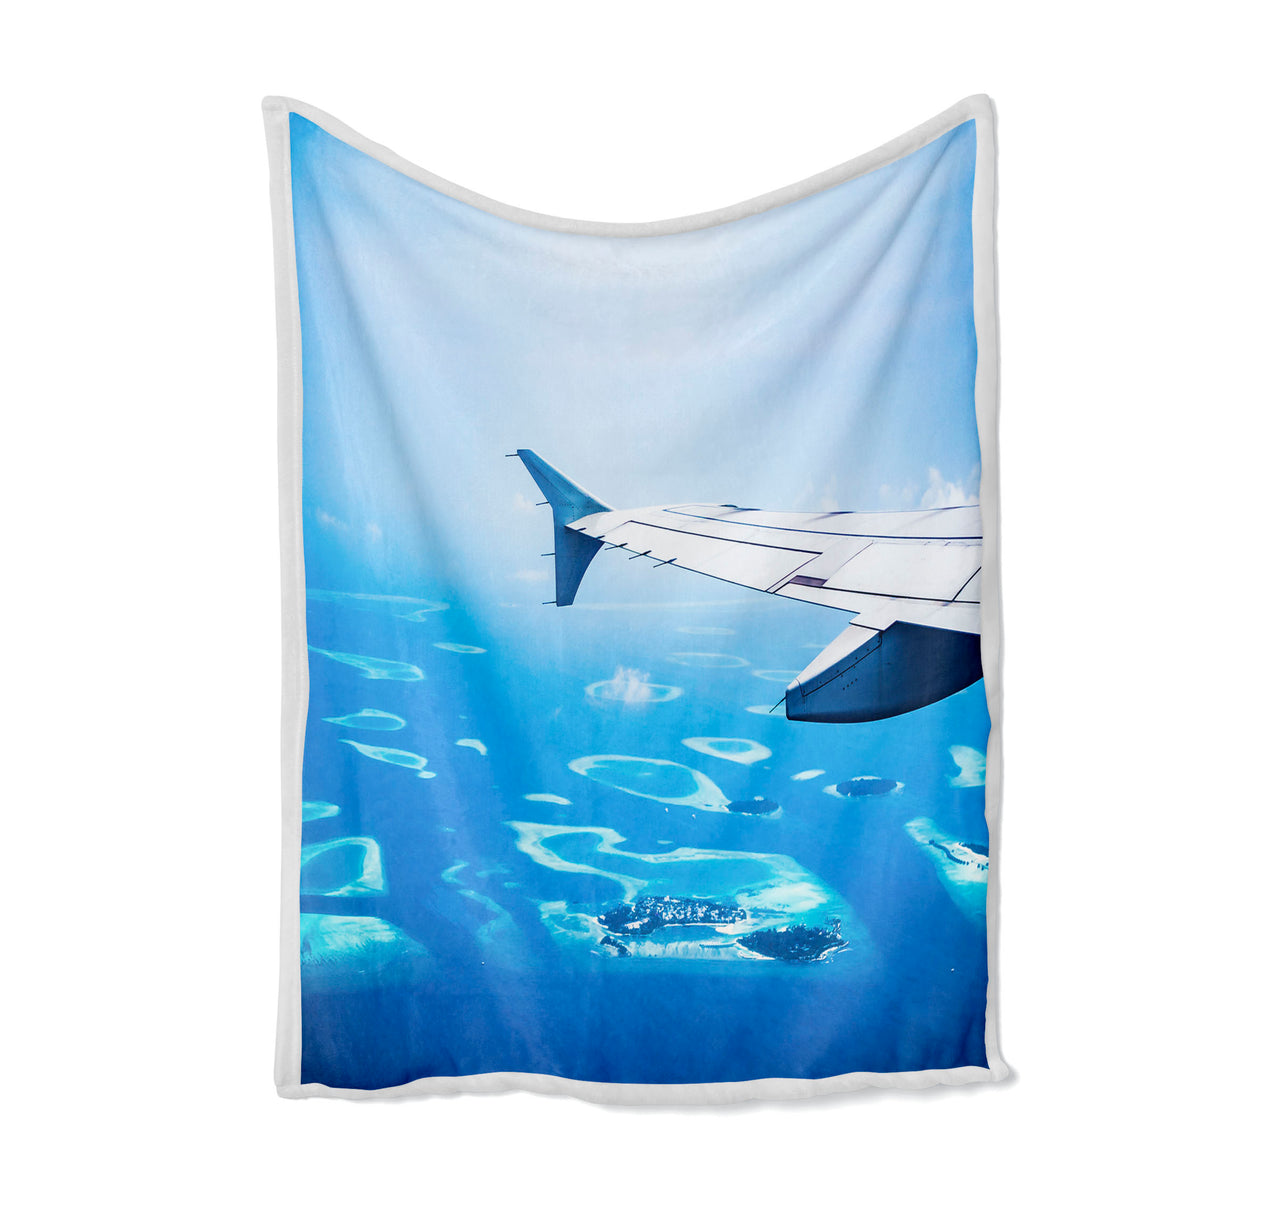 Outstanding View Through Airplane Wing Designed Bed Blankets & Covers